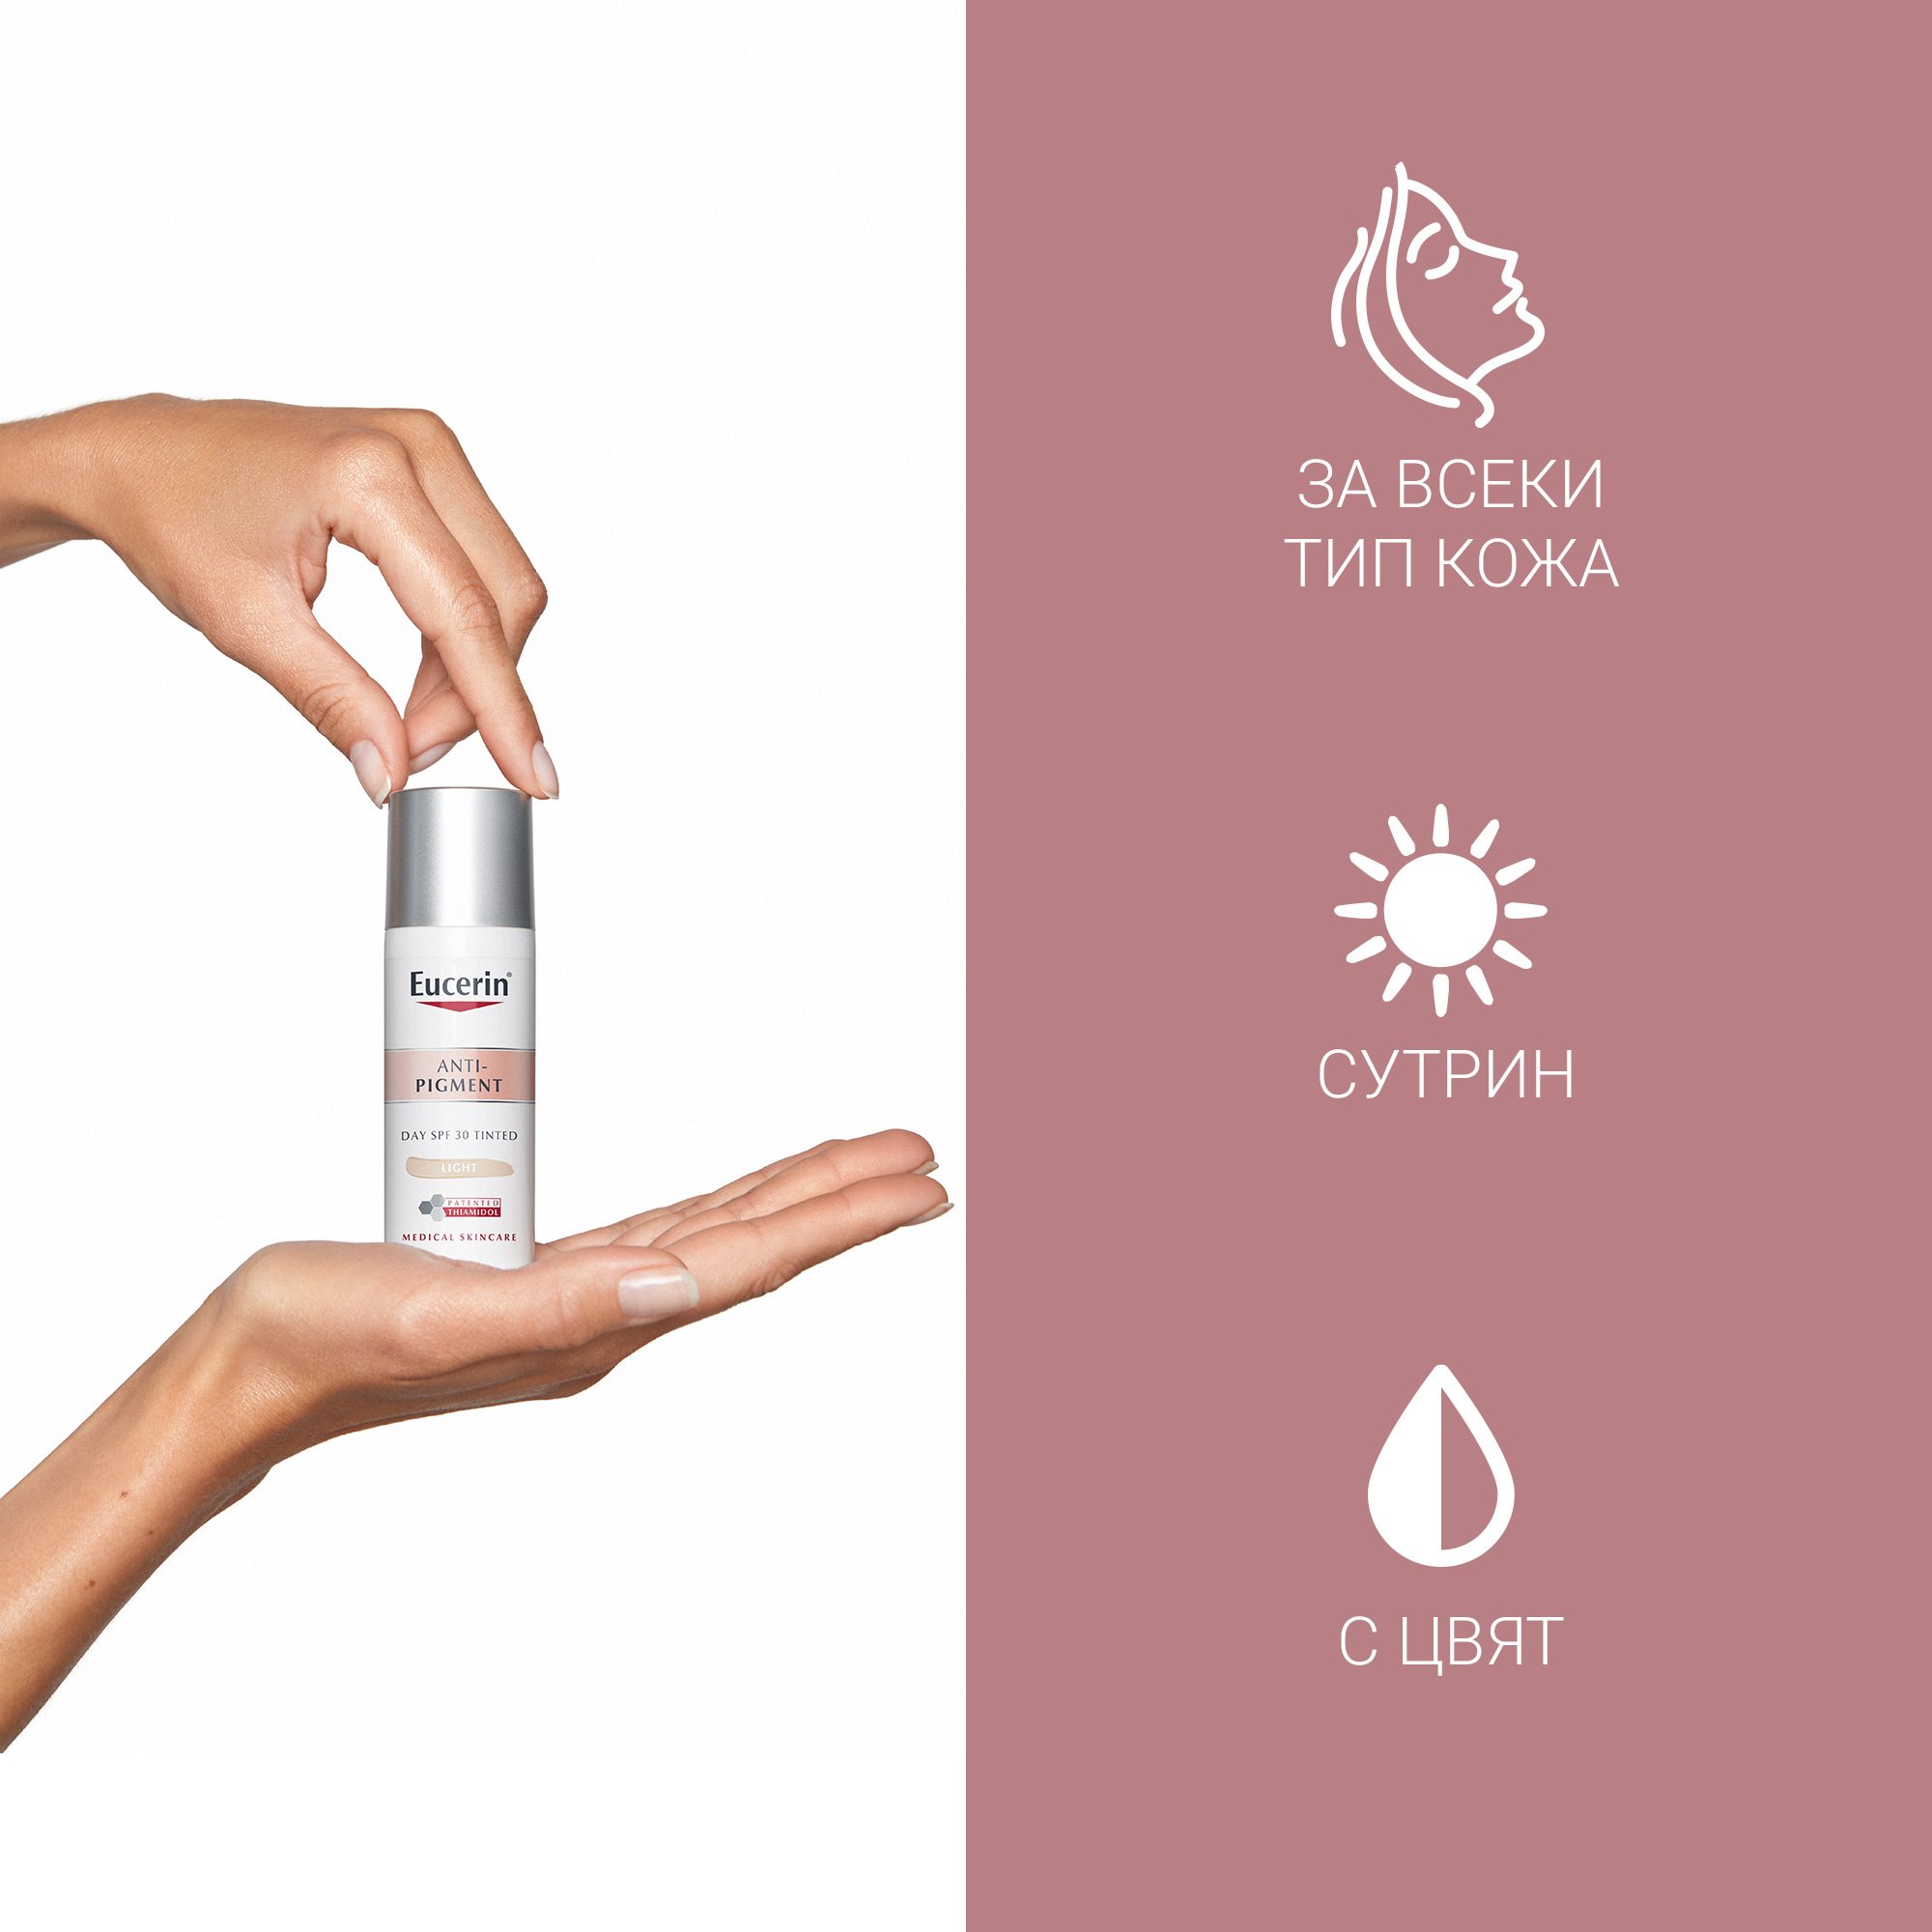 Eucerin Anti-Pigment Day SPF 30 Tinted Light contains Thiamidol, the number one ingredient for pigment spots.